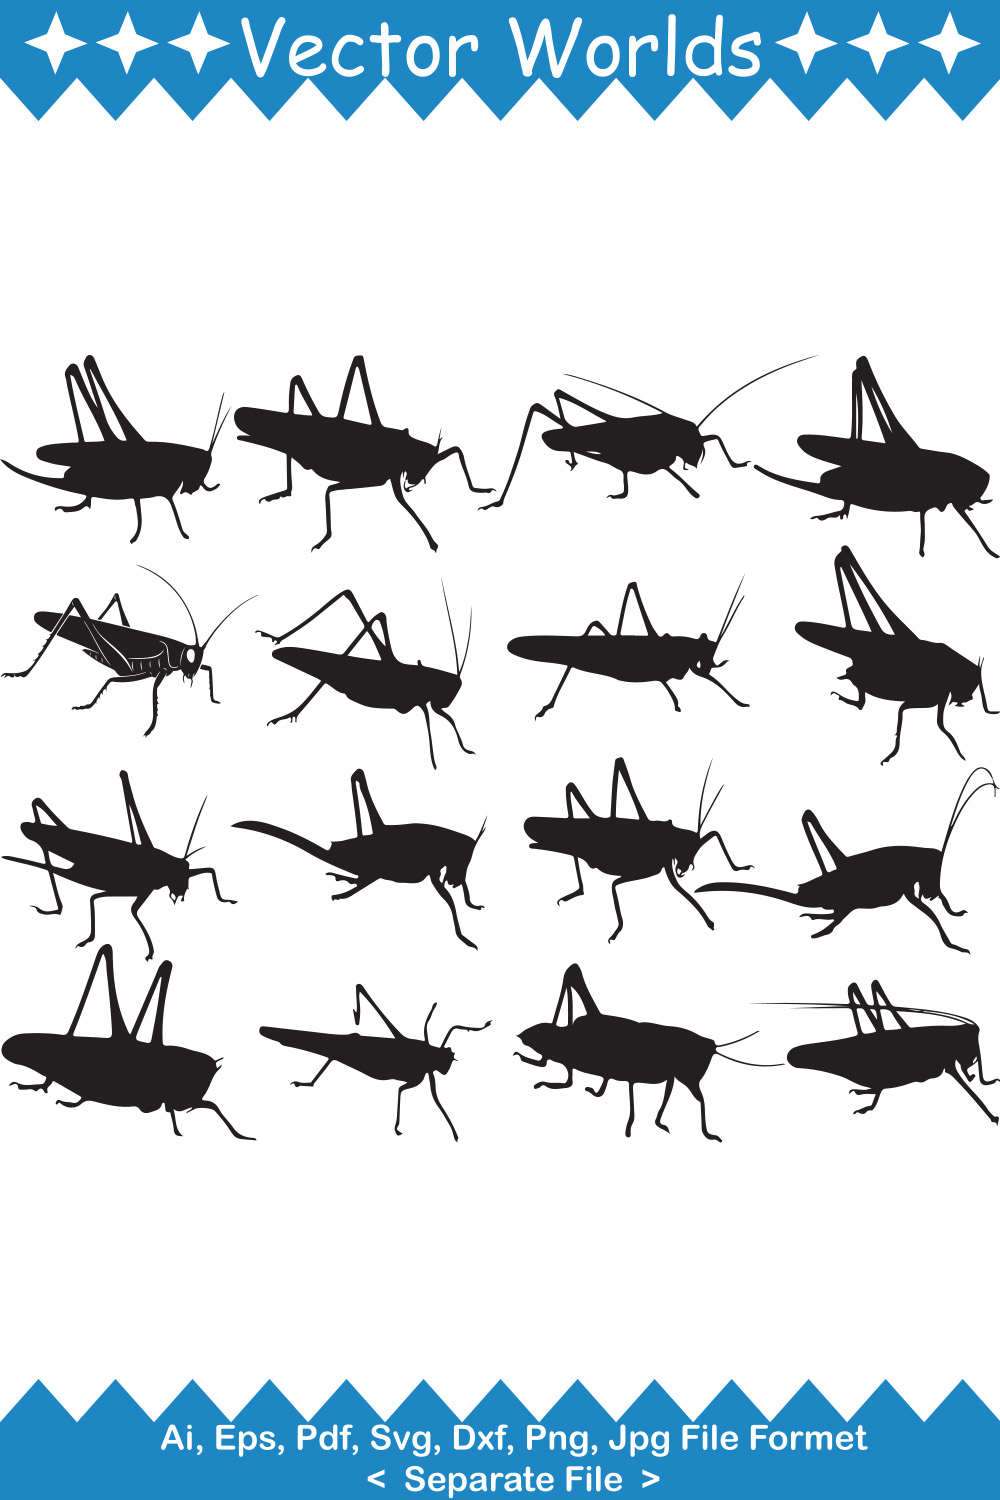 Large group of grasshoppers on a white background.